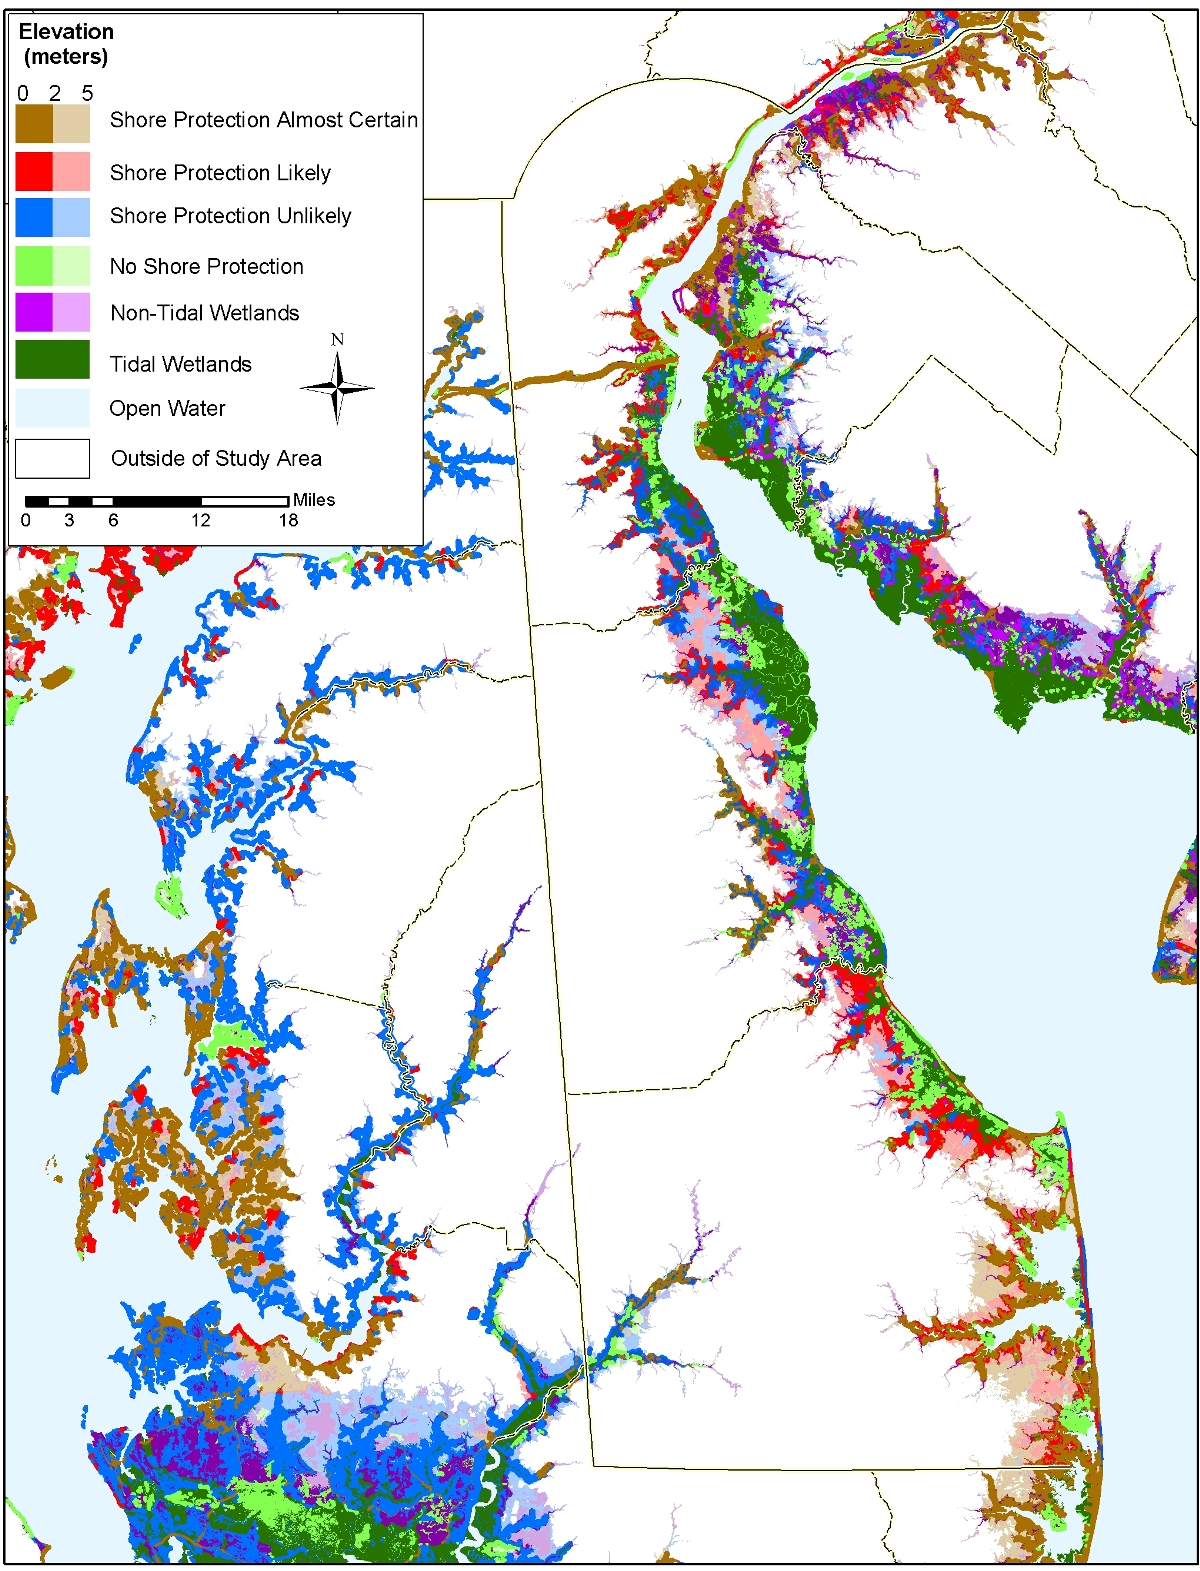 Delaware sea level rise planning map